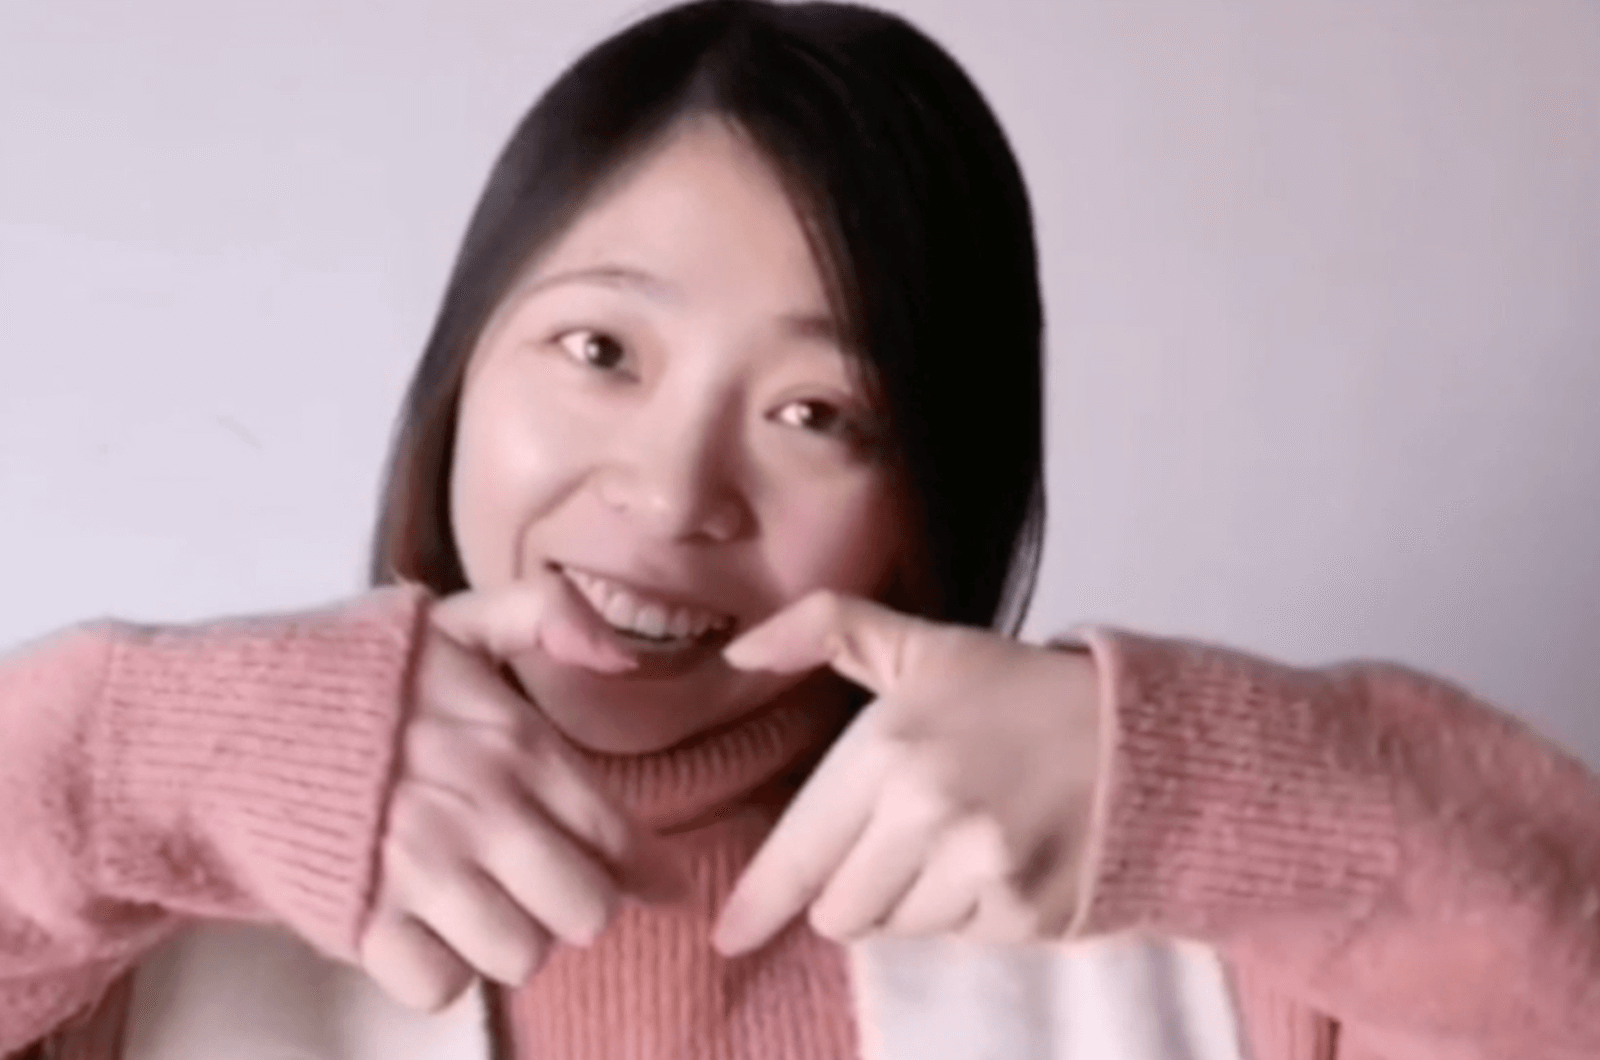 Woman in pink sweater smiling while holding up hands making a heart shape